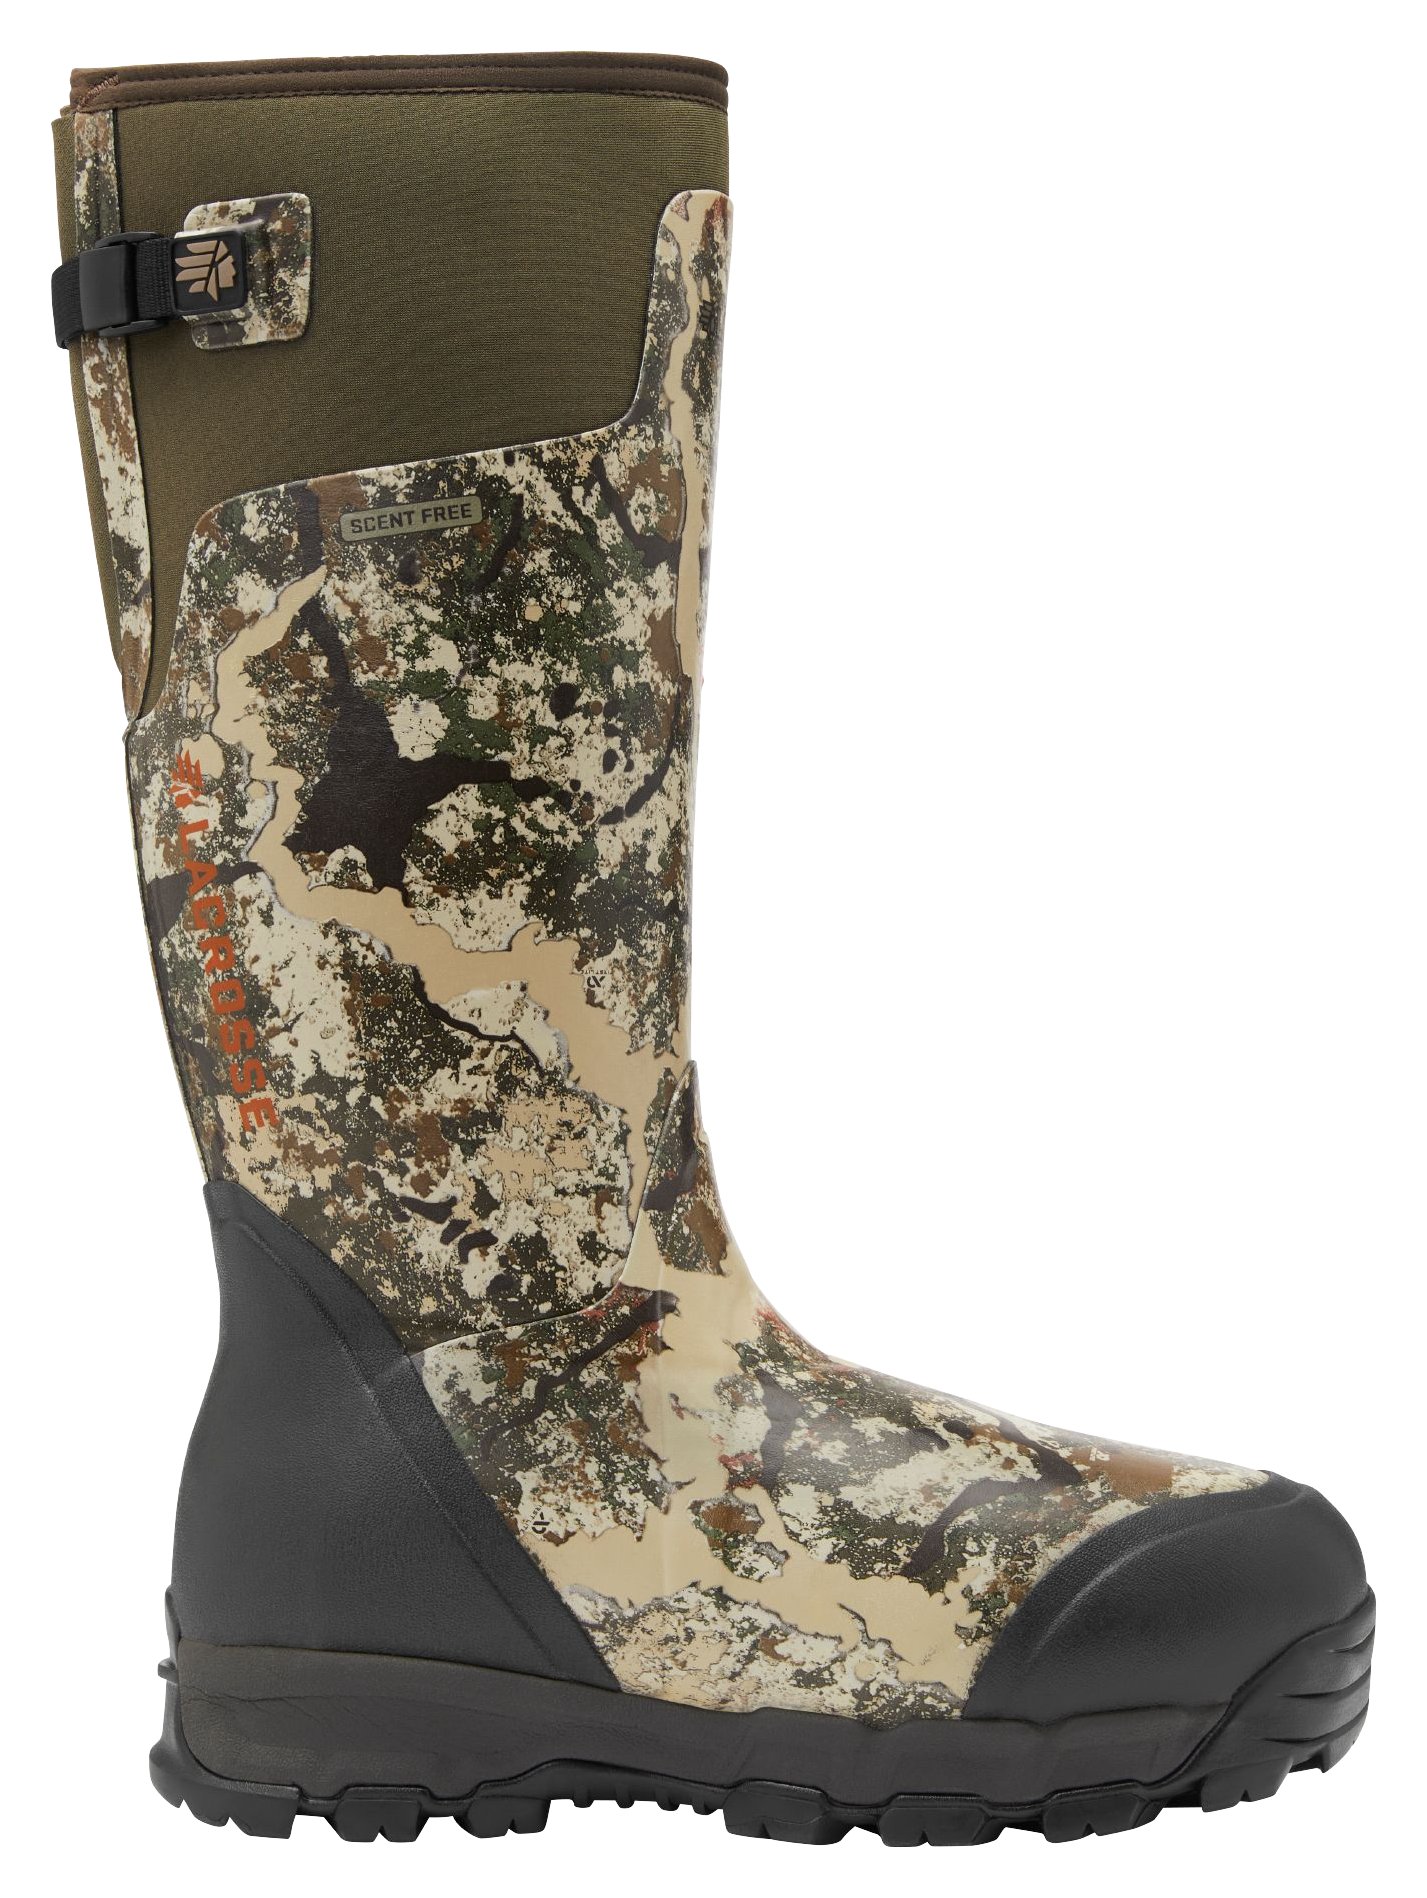 LaCrosse AlphaBurly Pro 1,600 Insulated Hunting Boots for Men - First Lite Specter - 5M